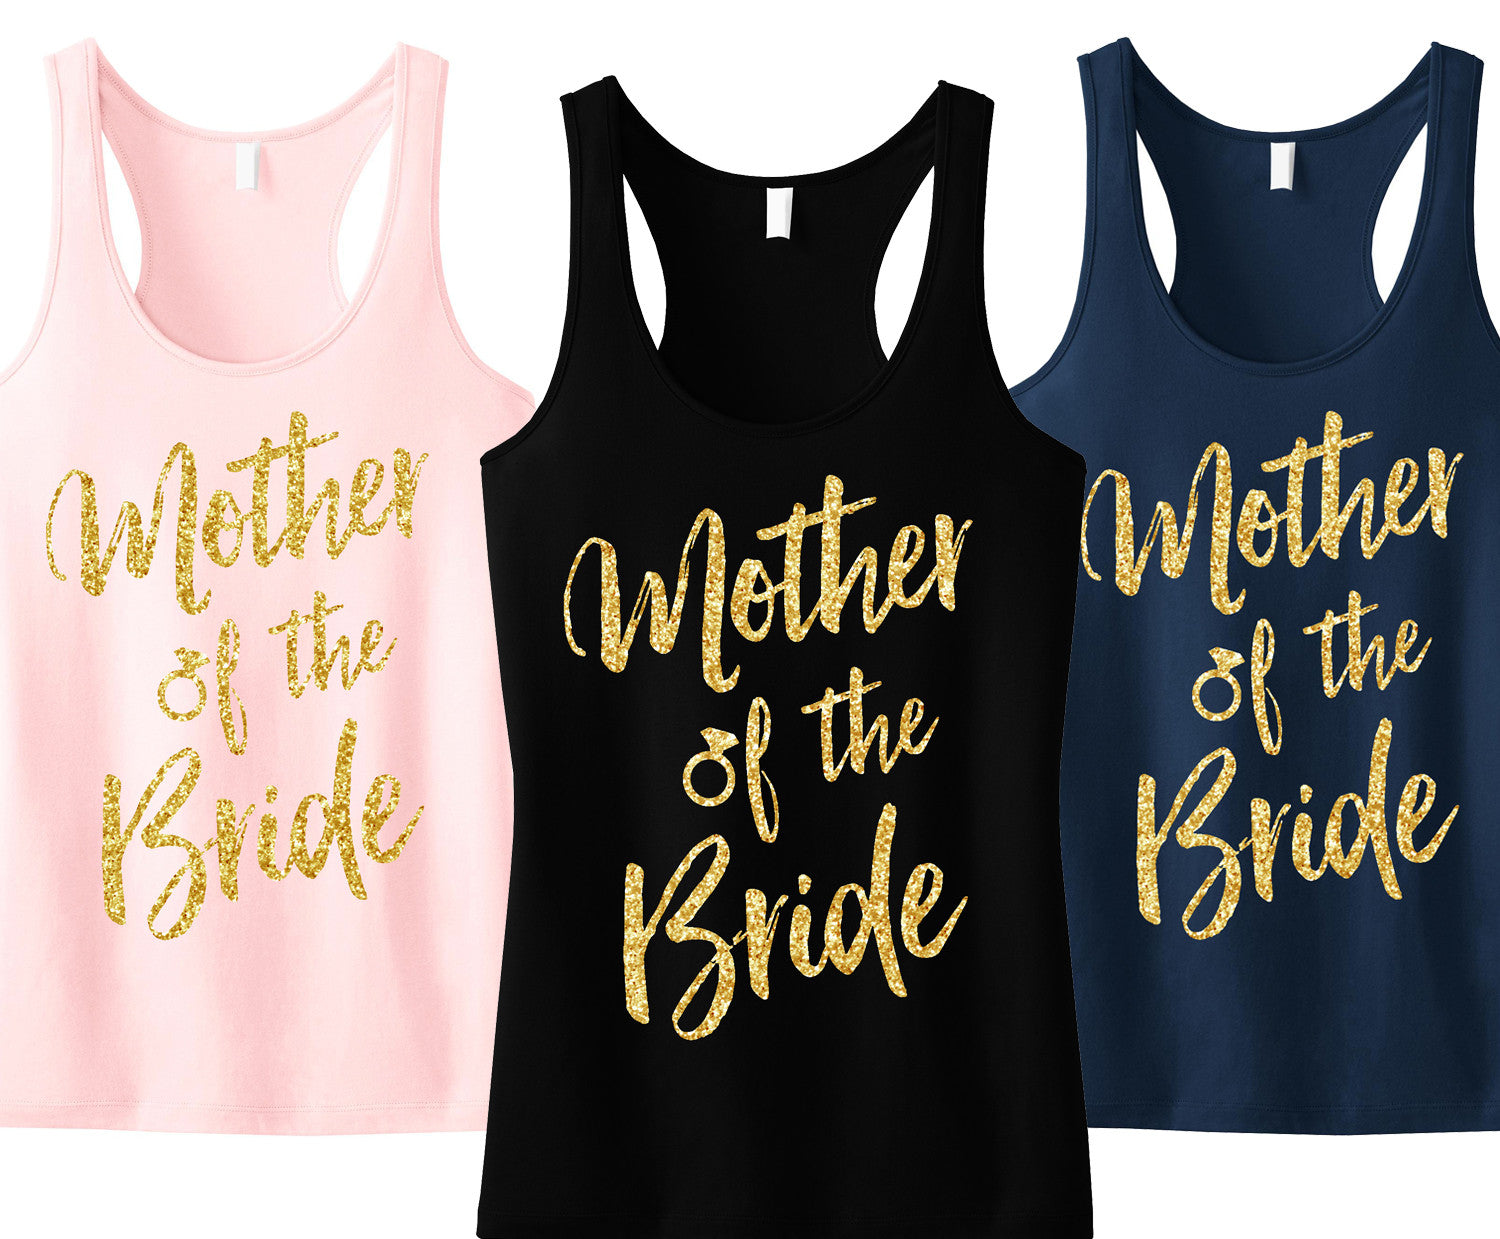 mother of the bride tops